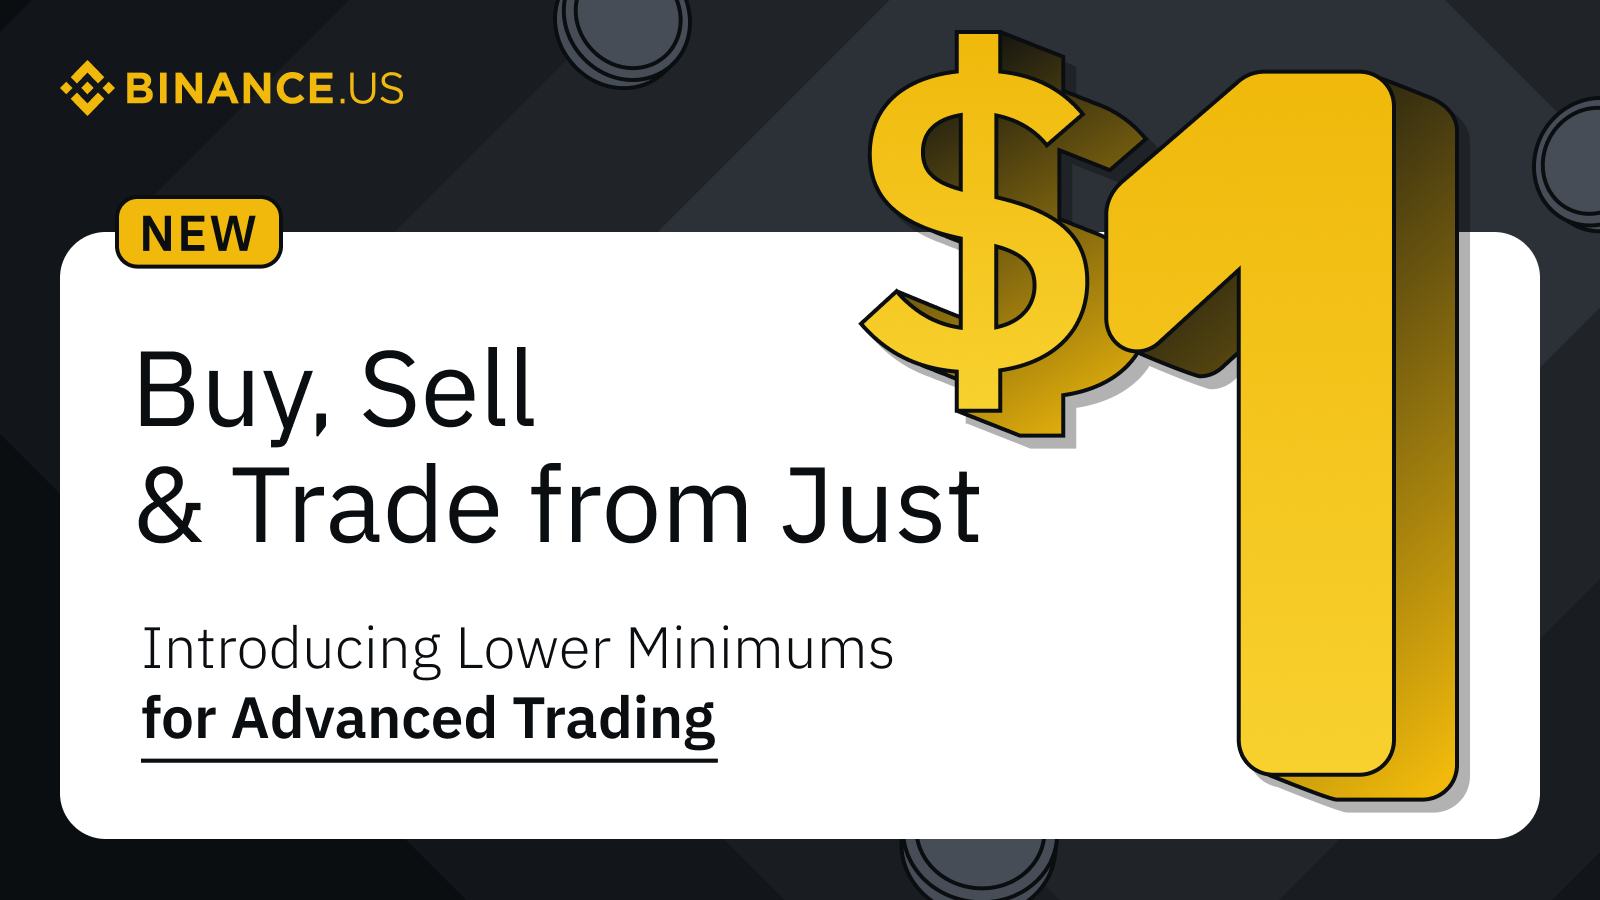 Binance.US Lowers Advanced Trading Limits to Just $1 on Select Pairs